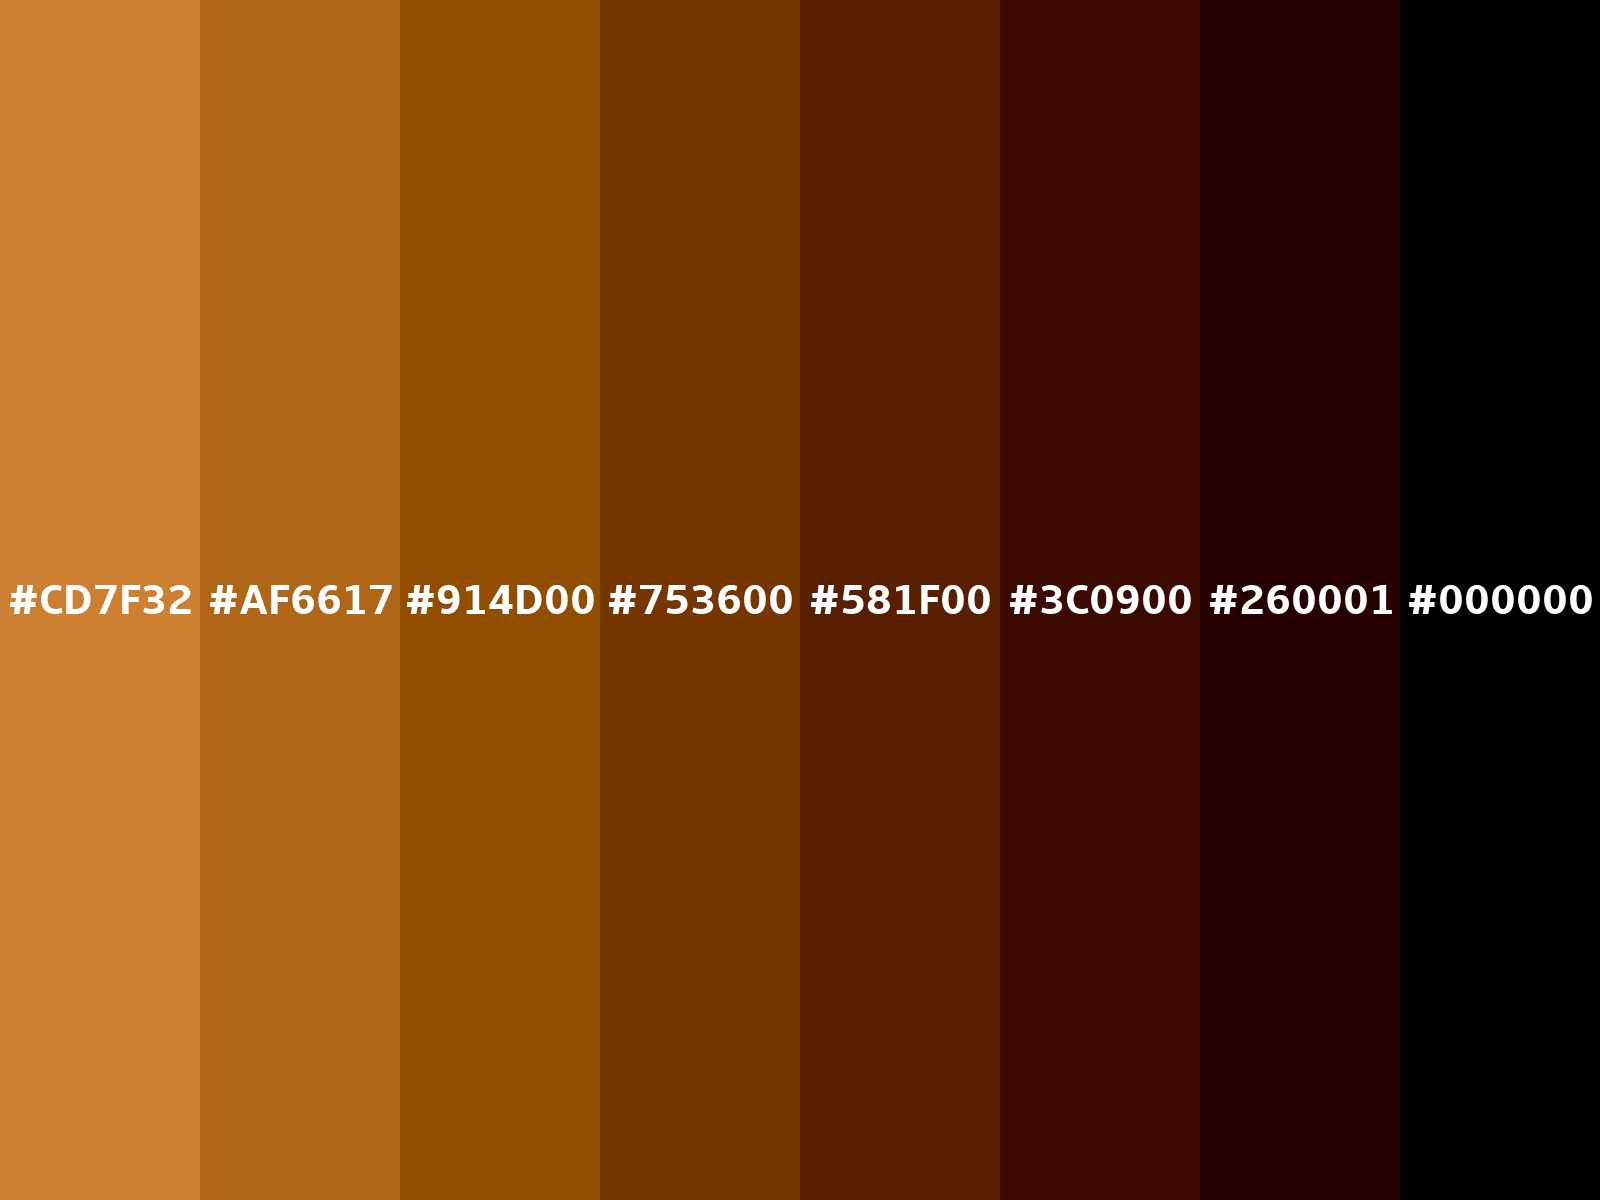 50+ Shades of Bronze Color (Names, HEX, RGB, & CMYK Codes) – CreativeBooster